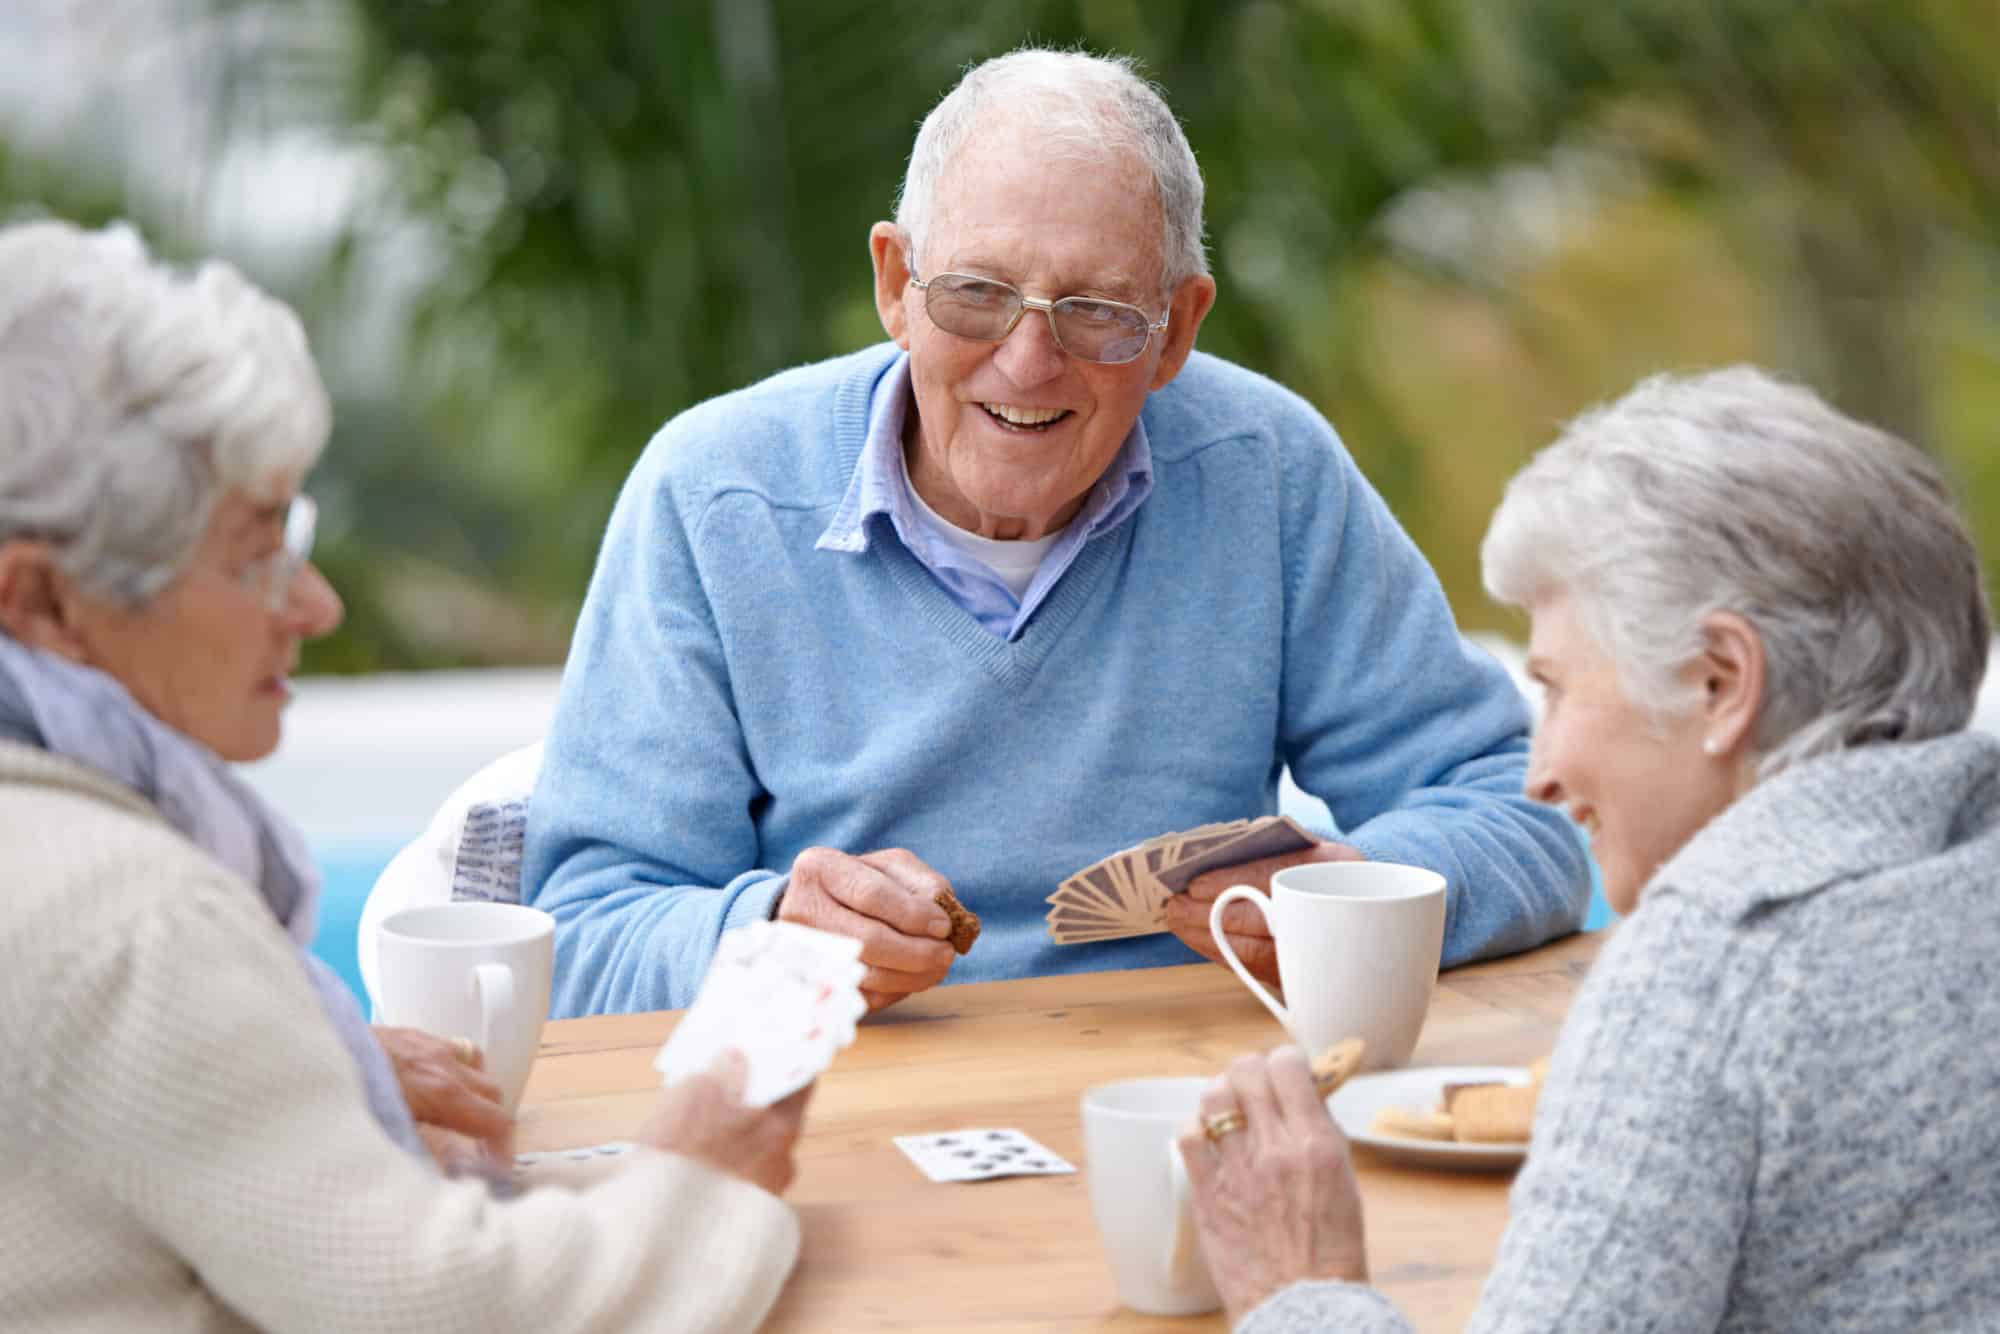 Engaging Activities for Memory Care Residents